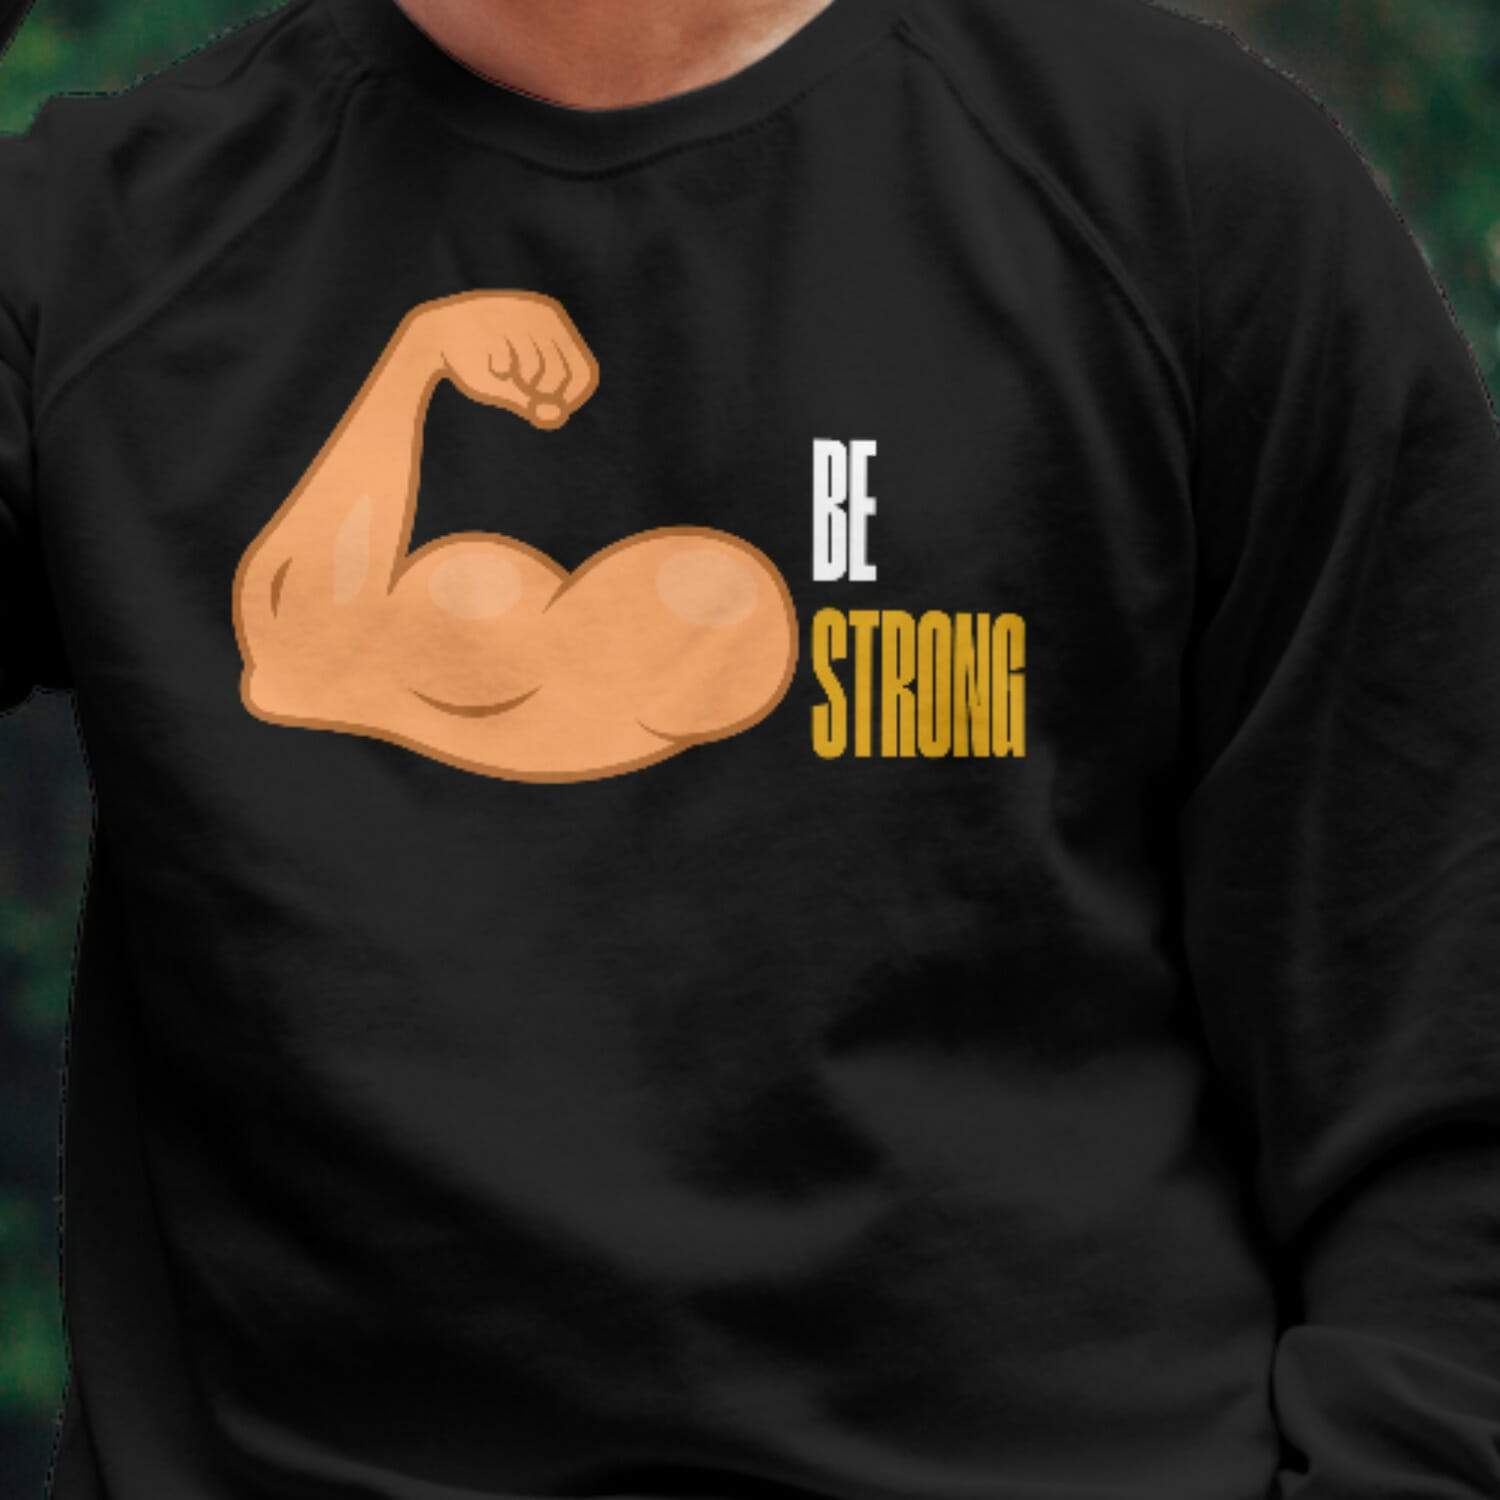 Free Design For T-shirt Be strong Gym